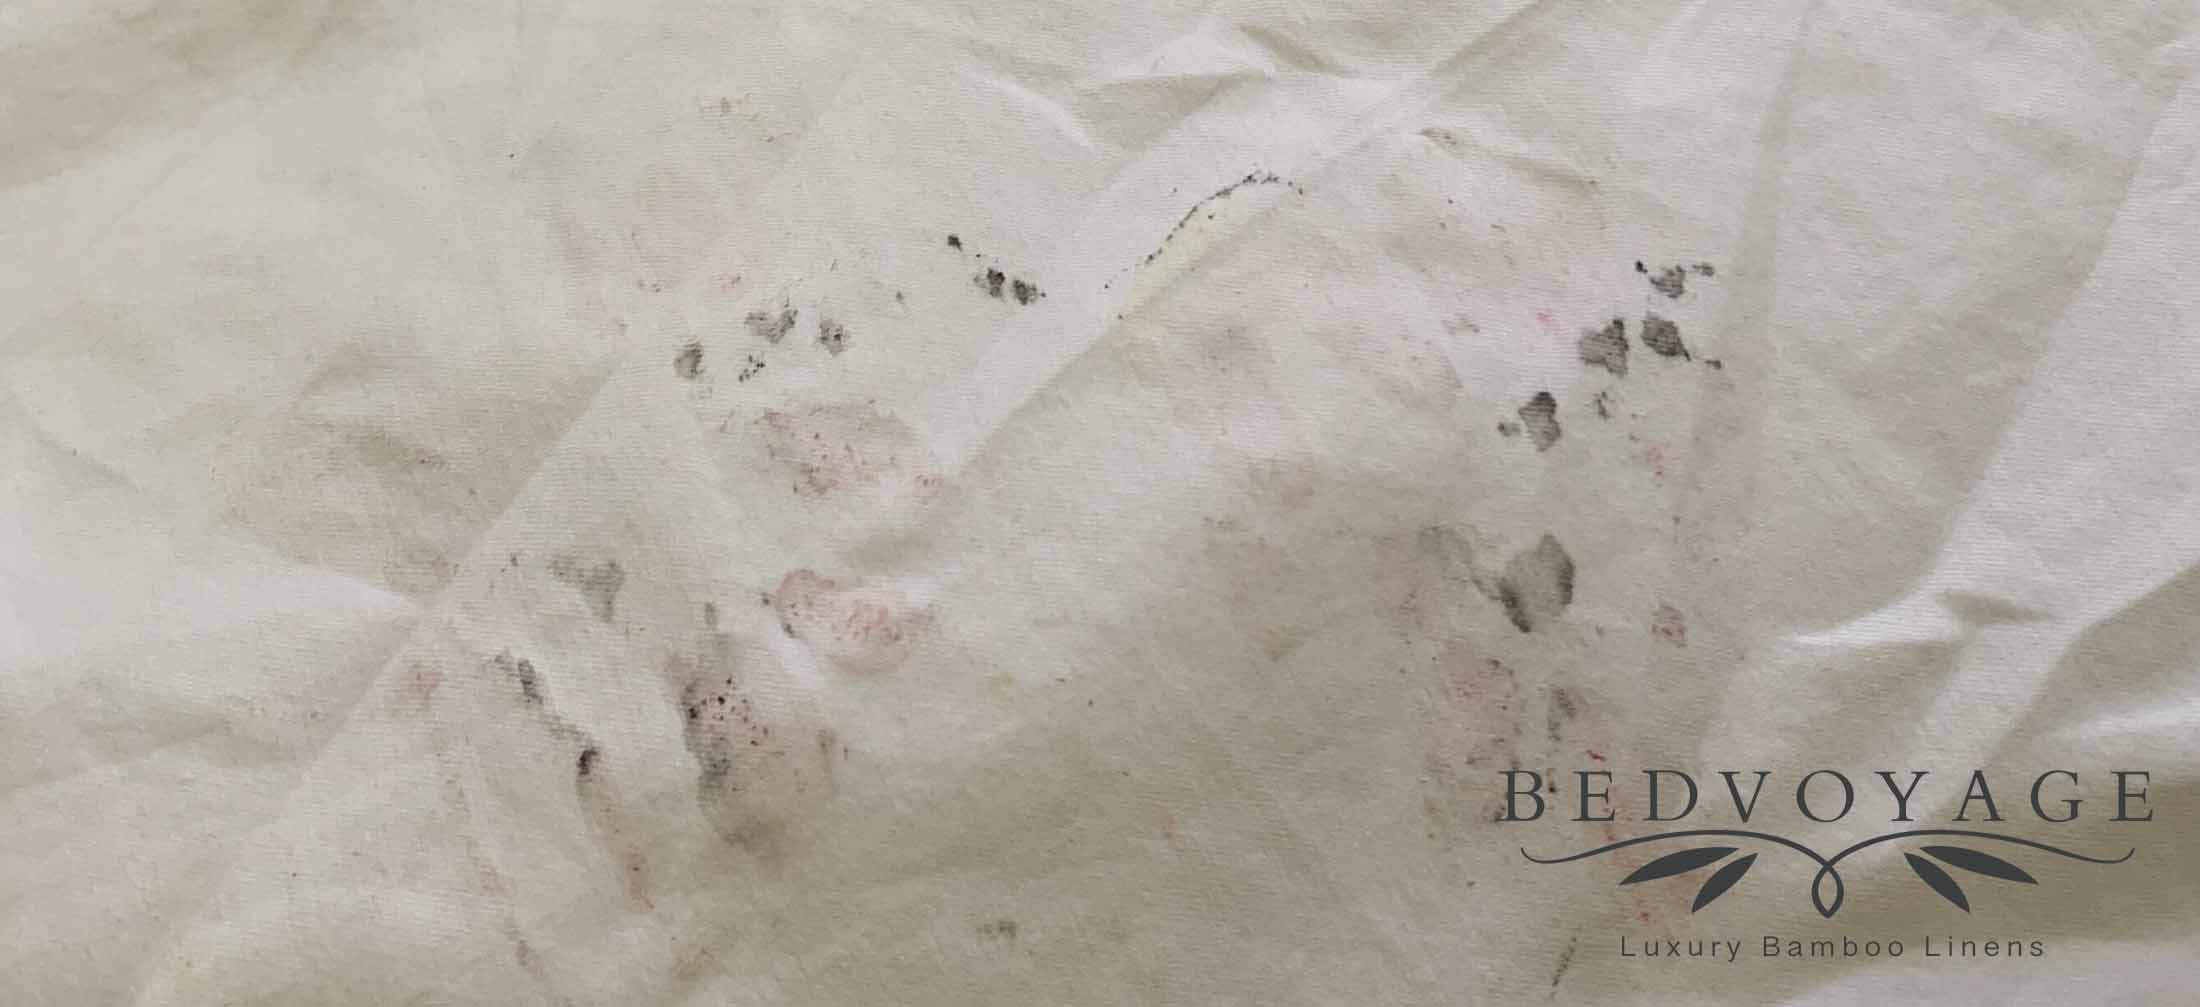 Bamboo Bed Sheet Stain Removal Guide